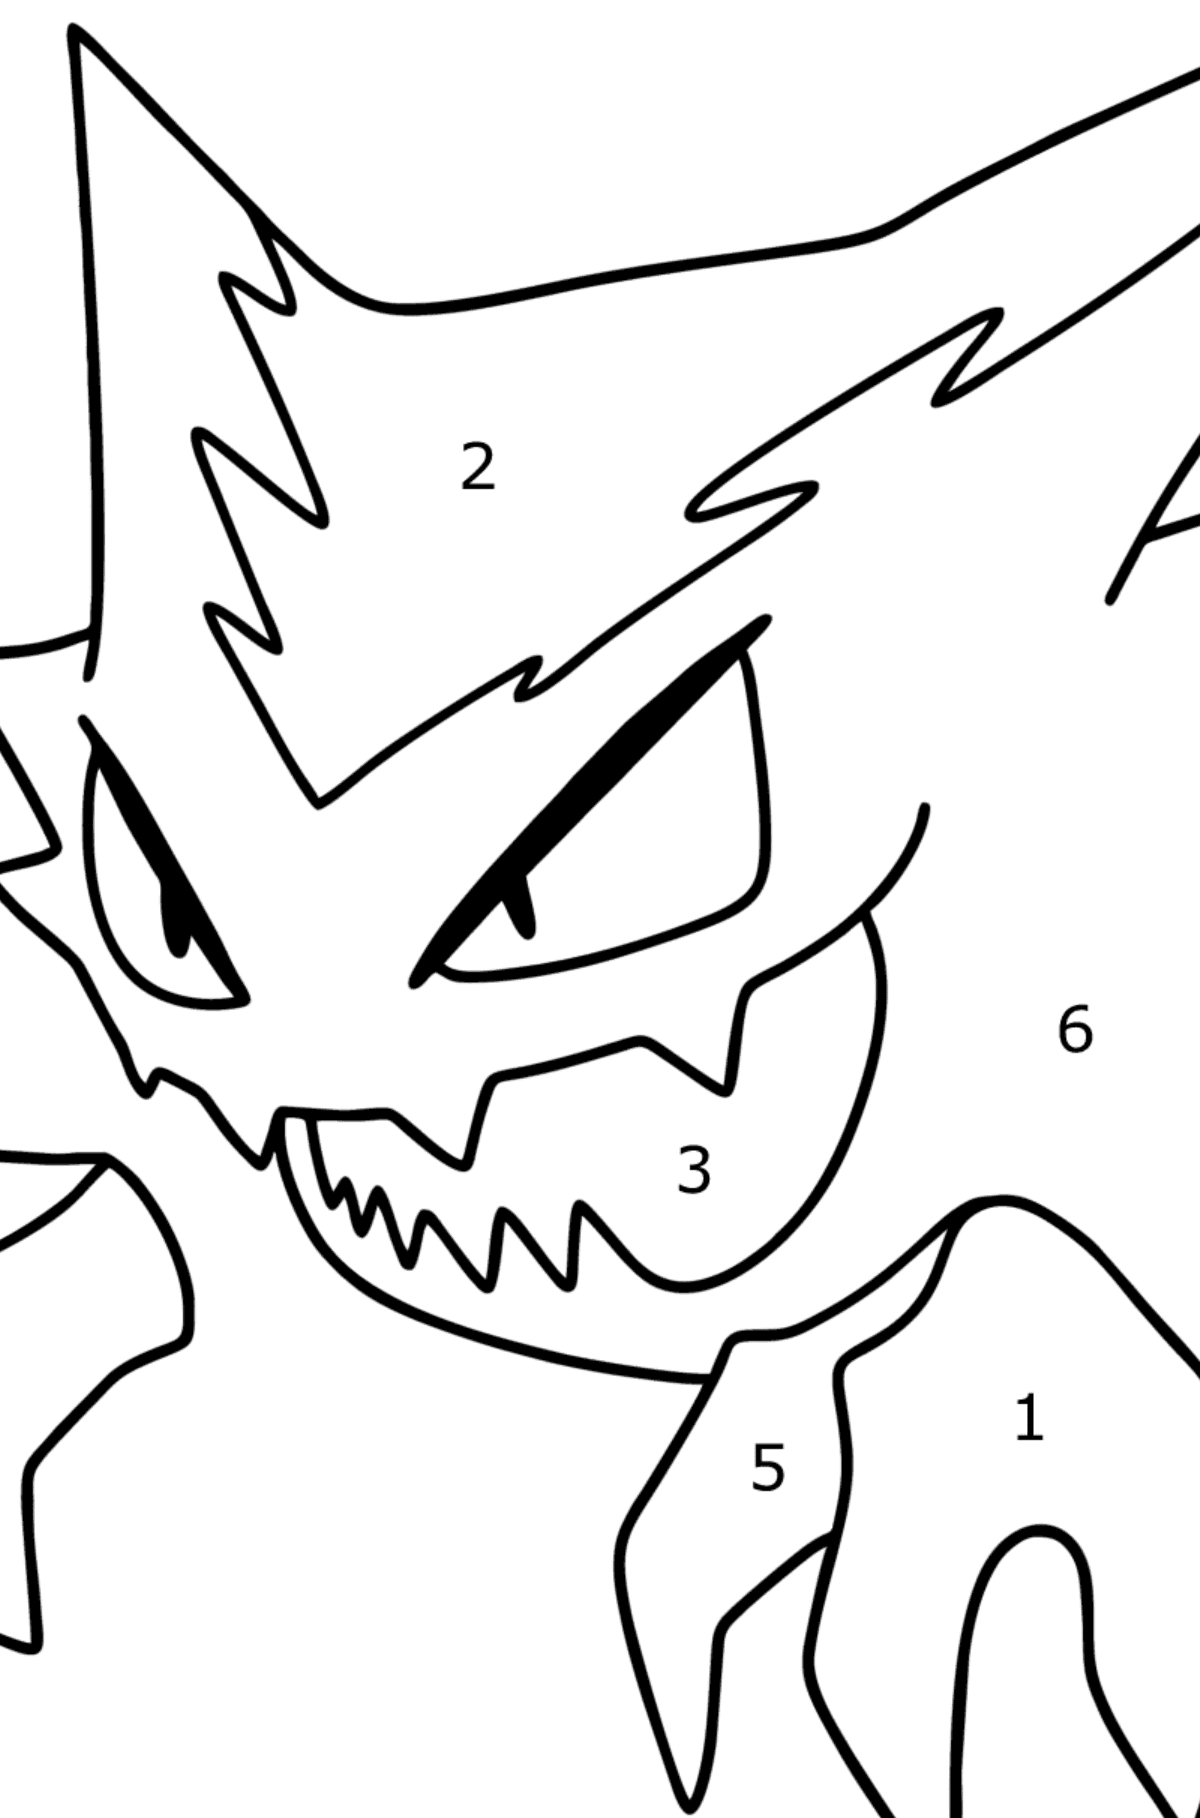 Pokémon Go Haunter coloring page - Coloring by Numbers for Kids